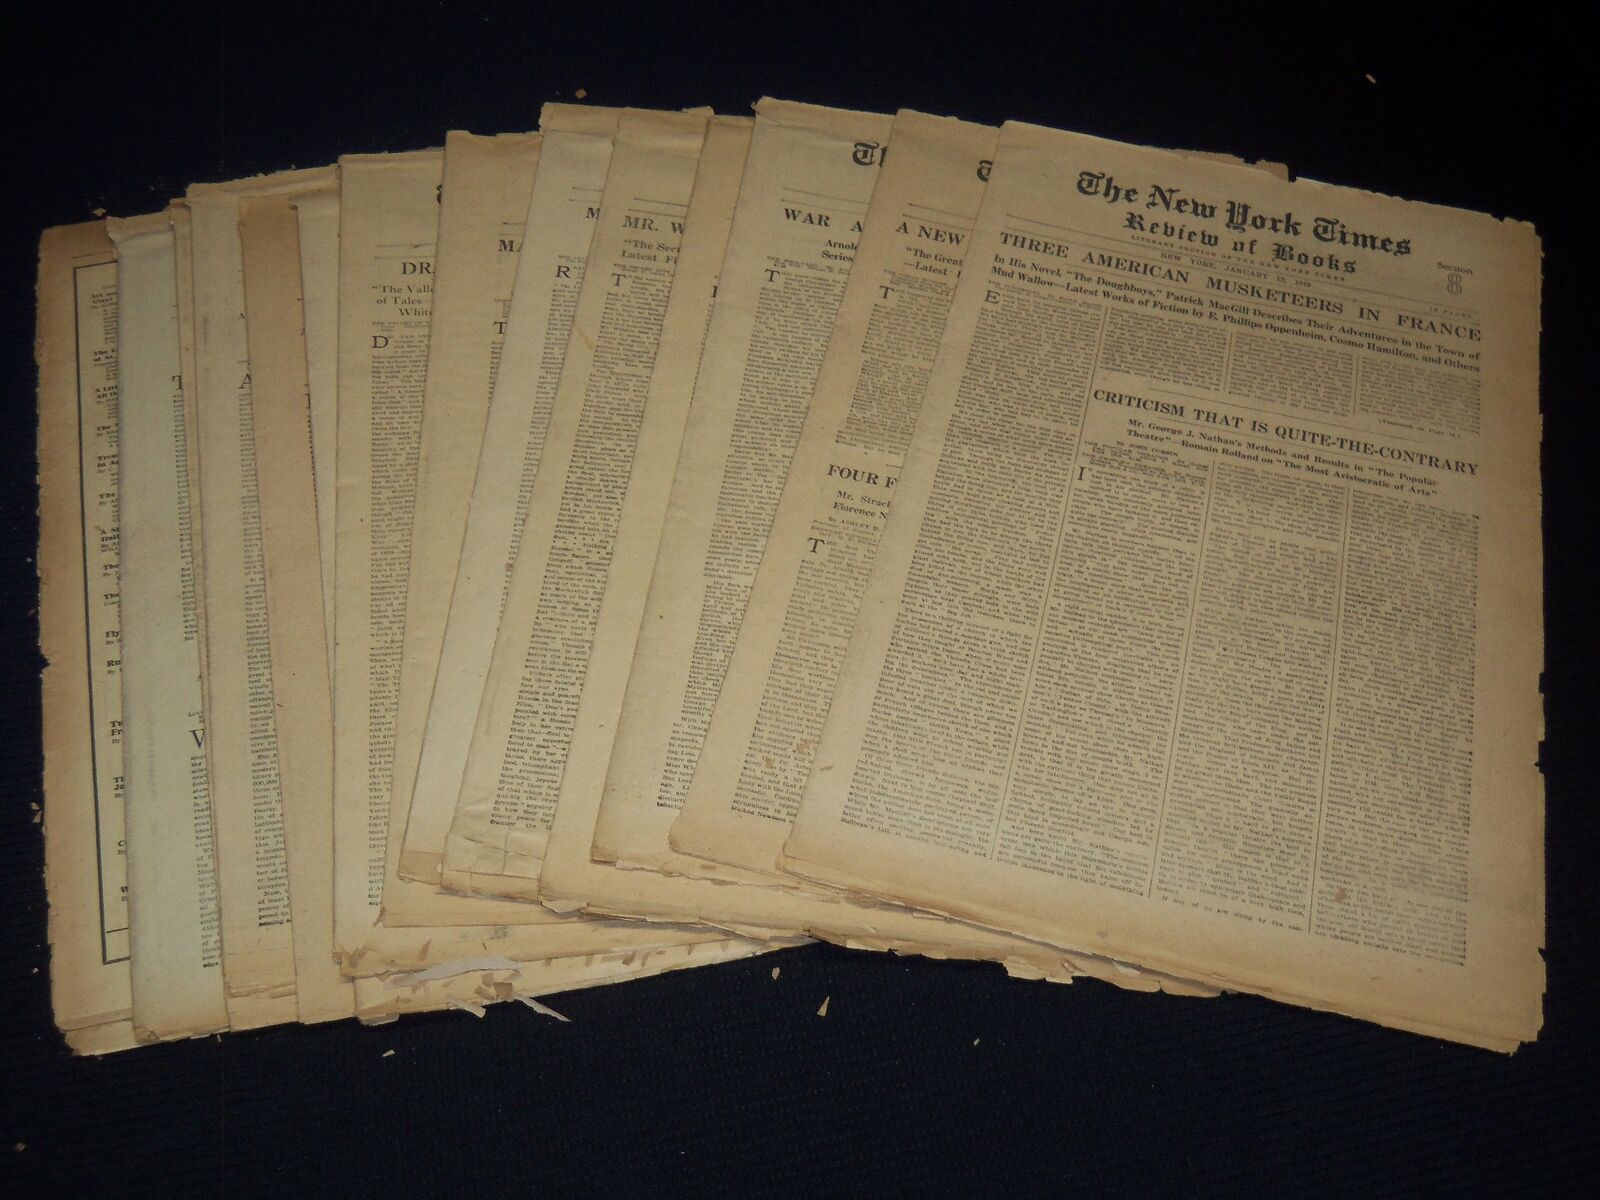 1919 NEW YORK TIMES NEWSPAPER BOOK REVIEW SECTIONS LOT OF 15 ISSUES - O 3221F